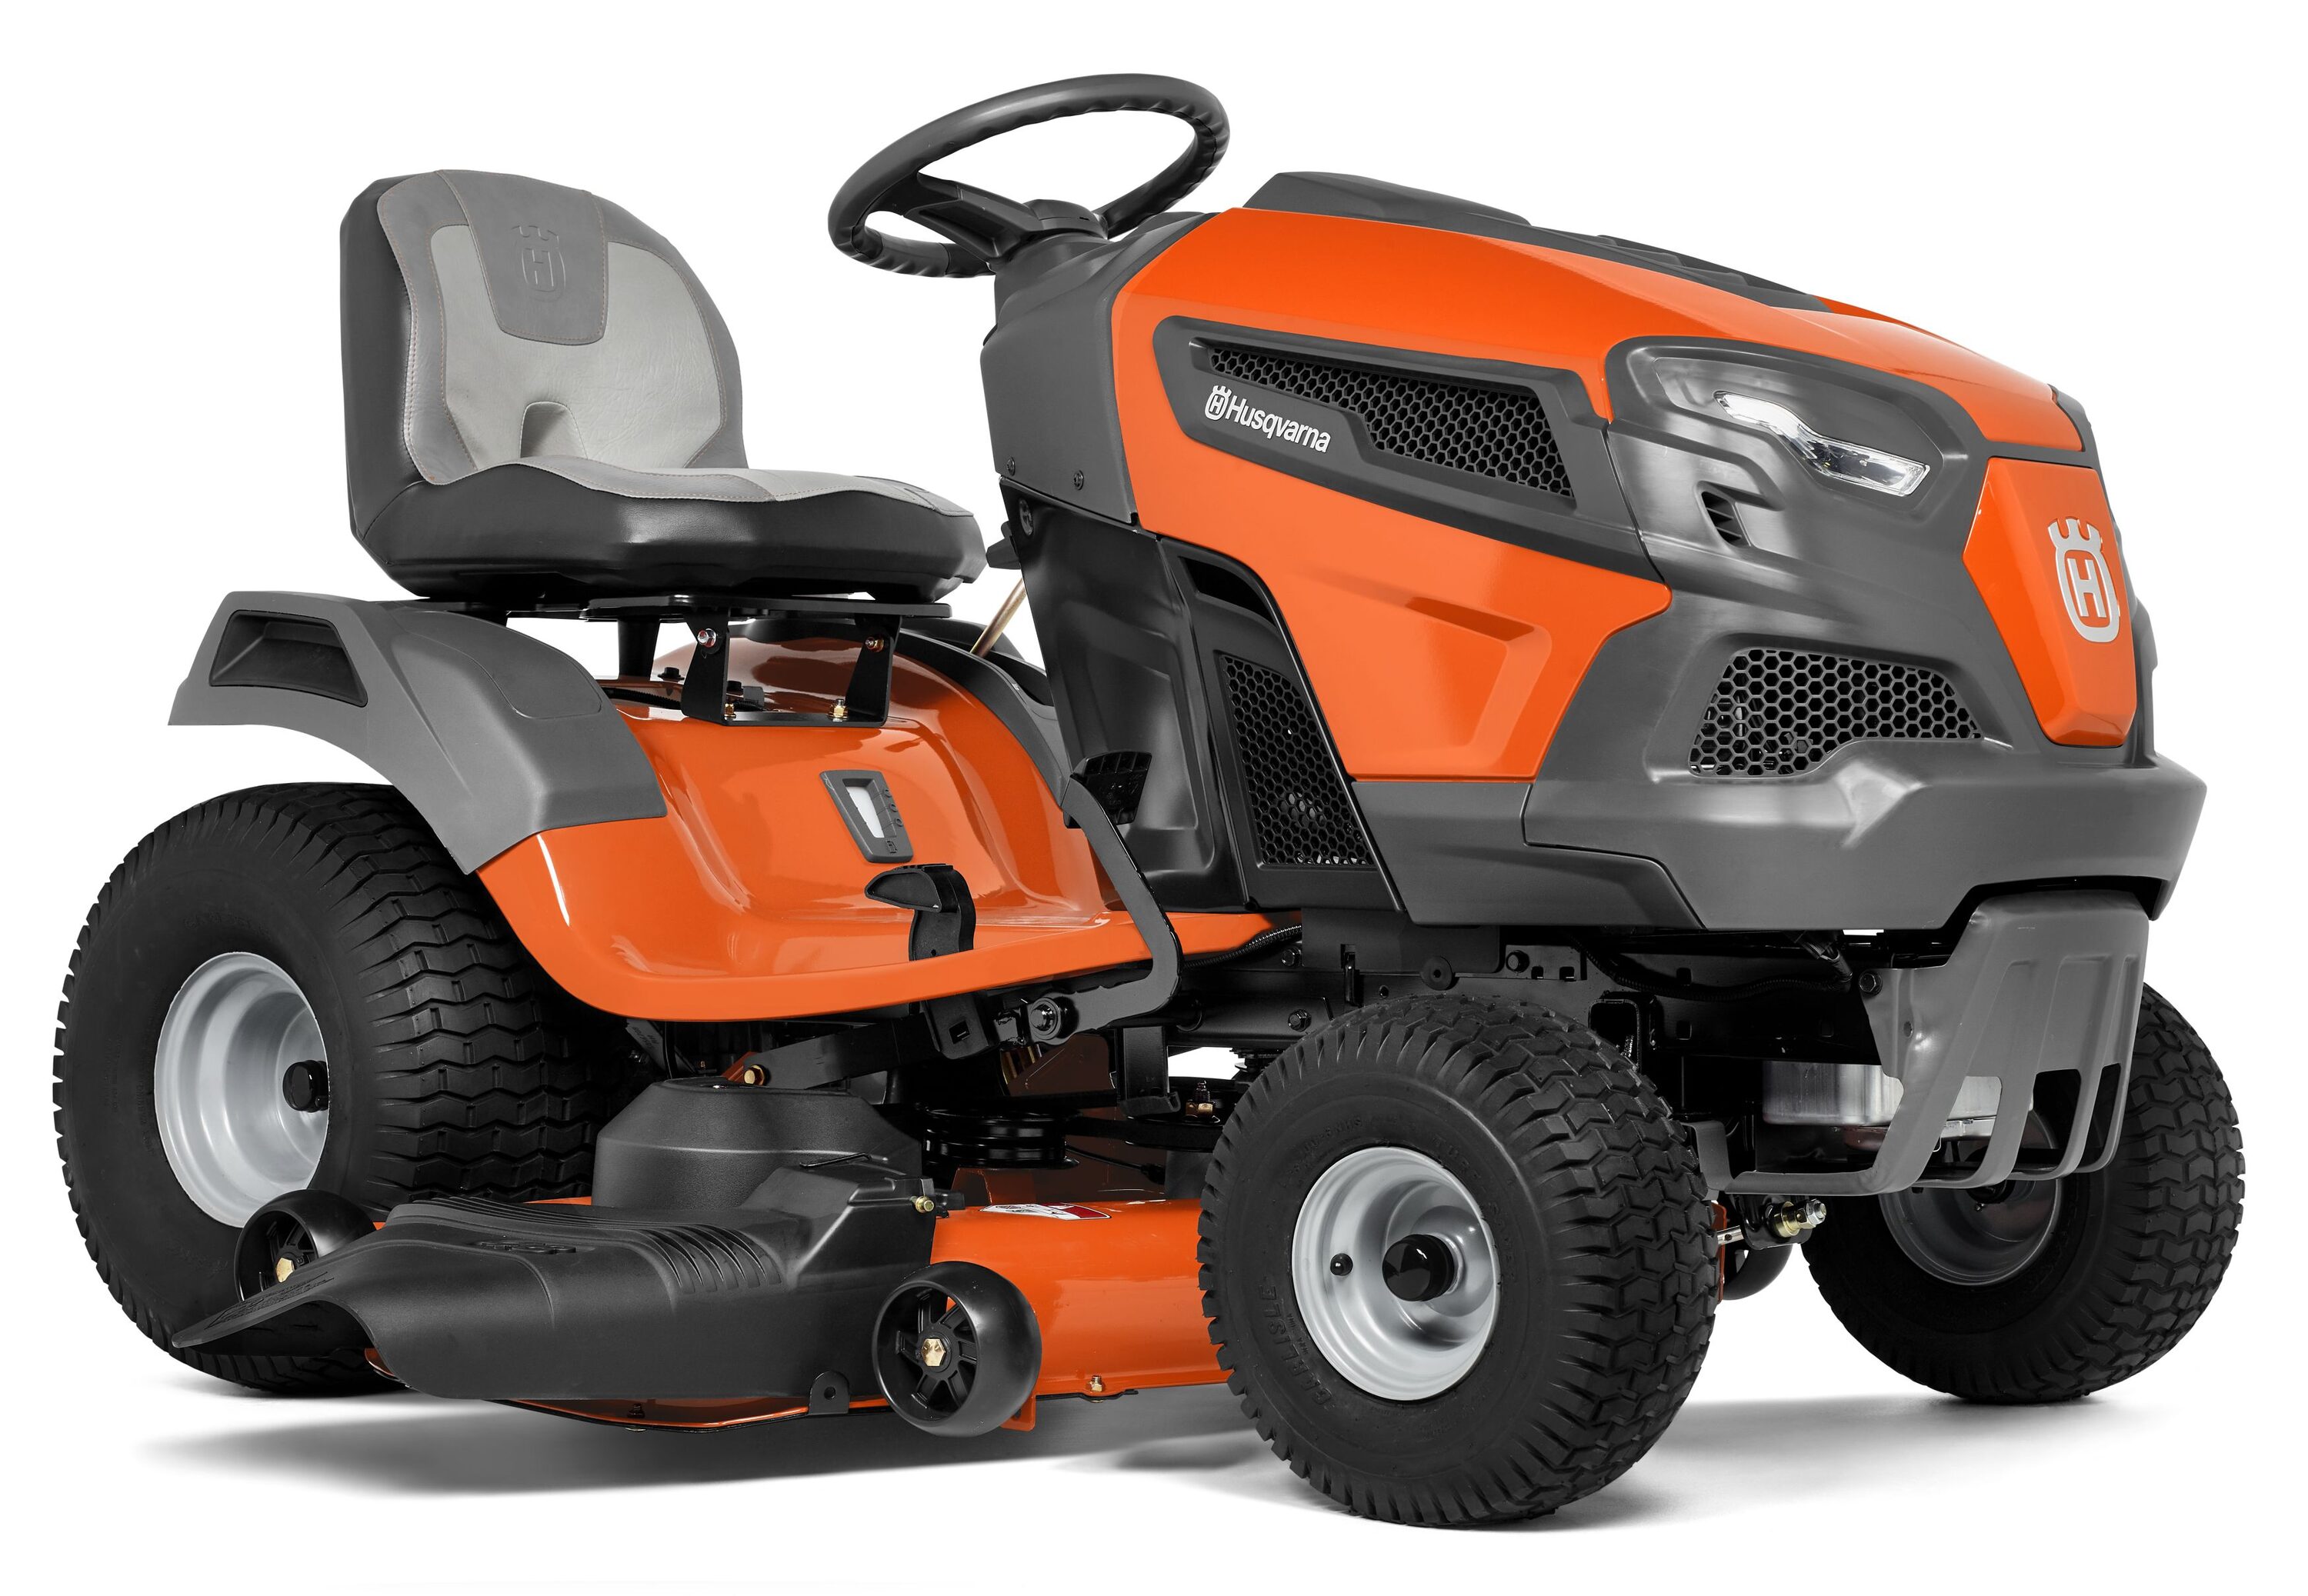 ts148x-gas-riding-lawn-mowers-at-lowes